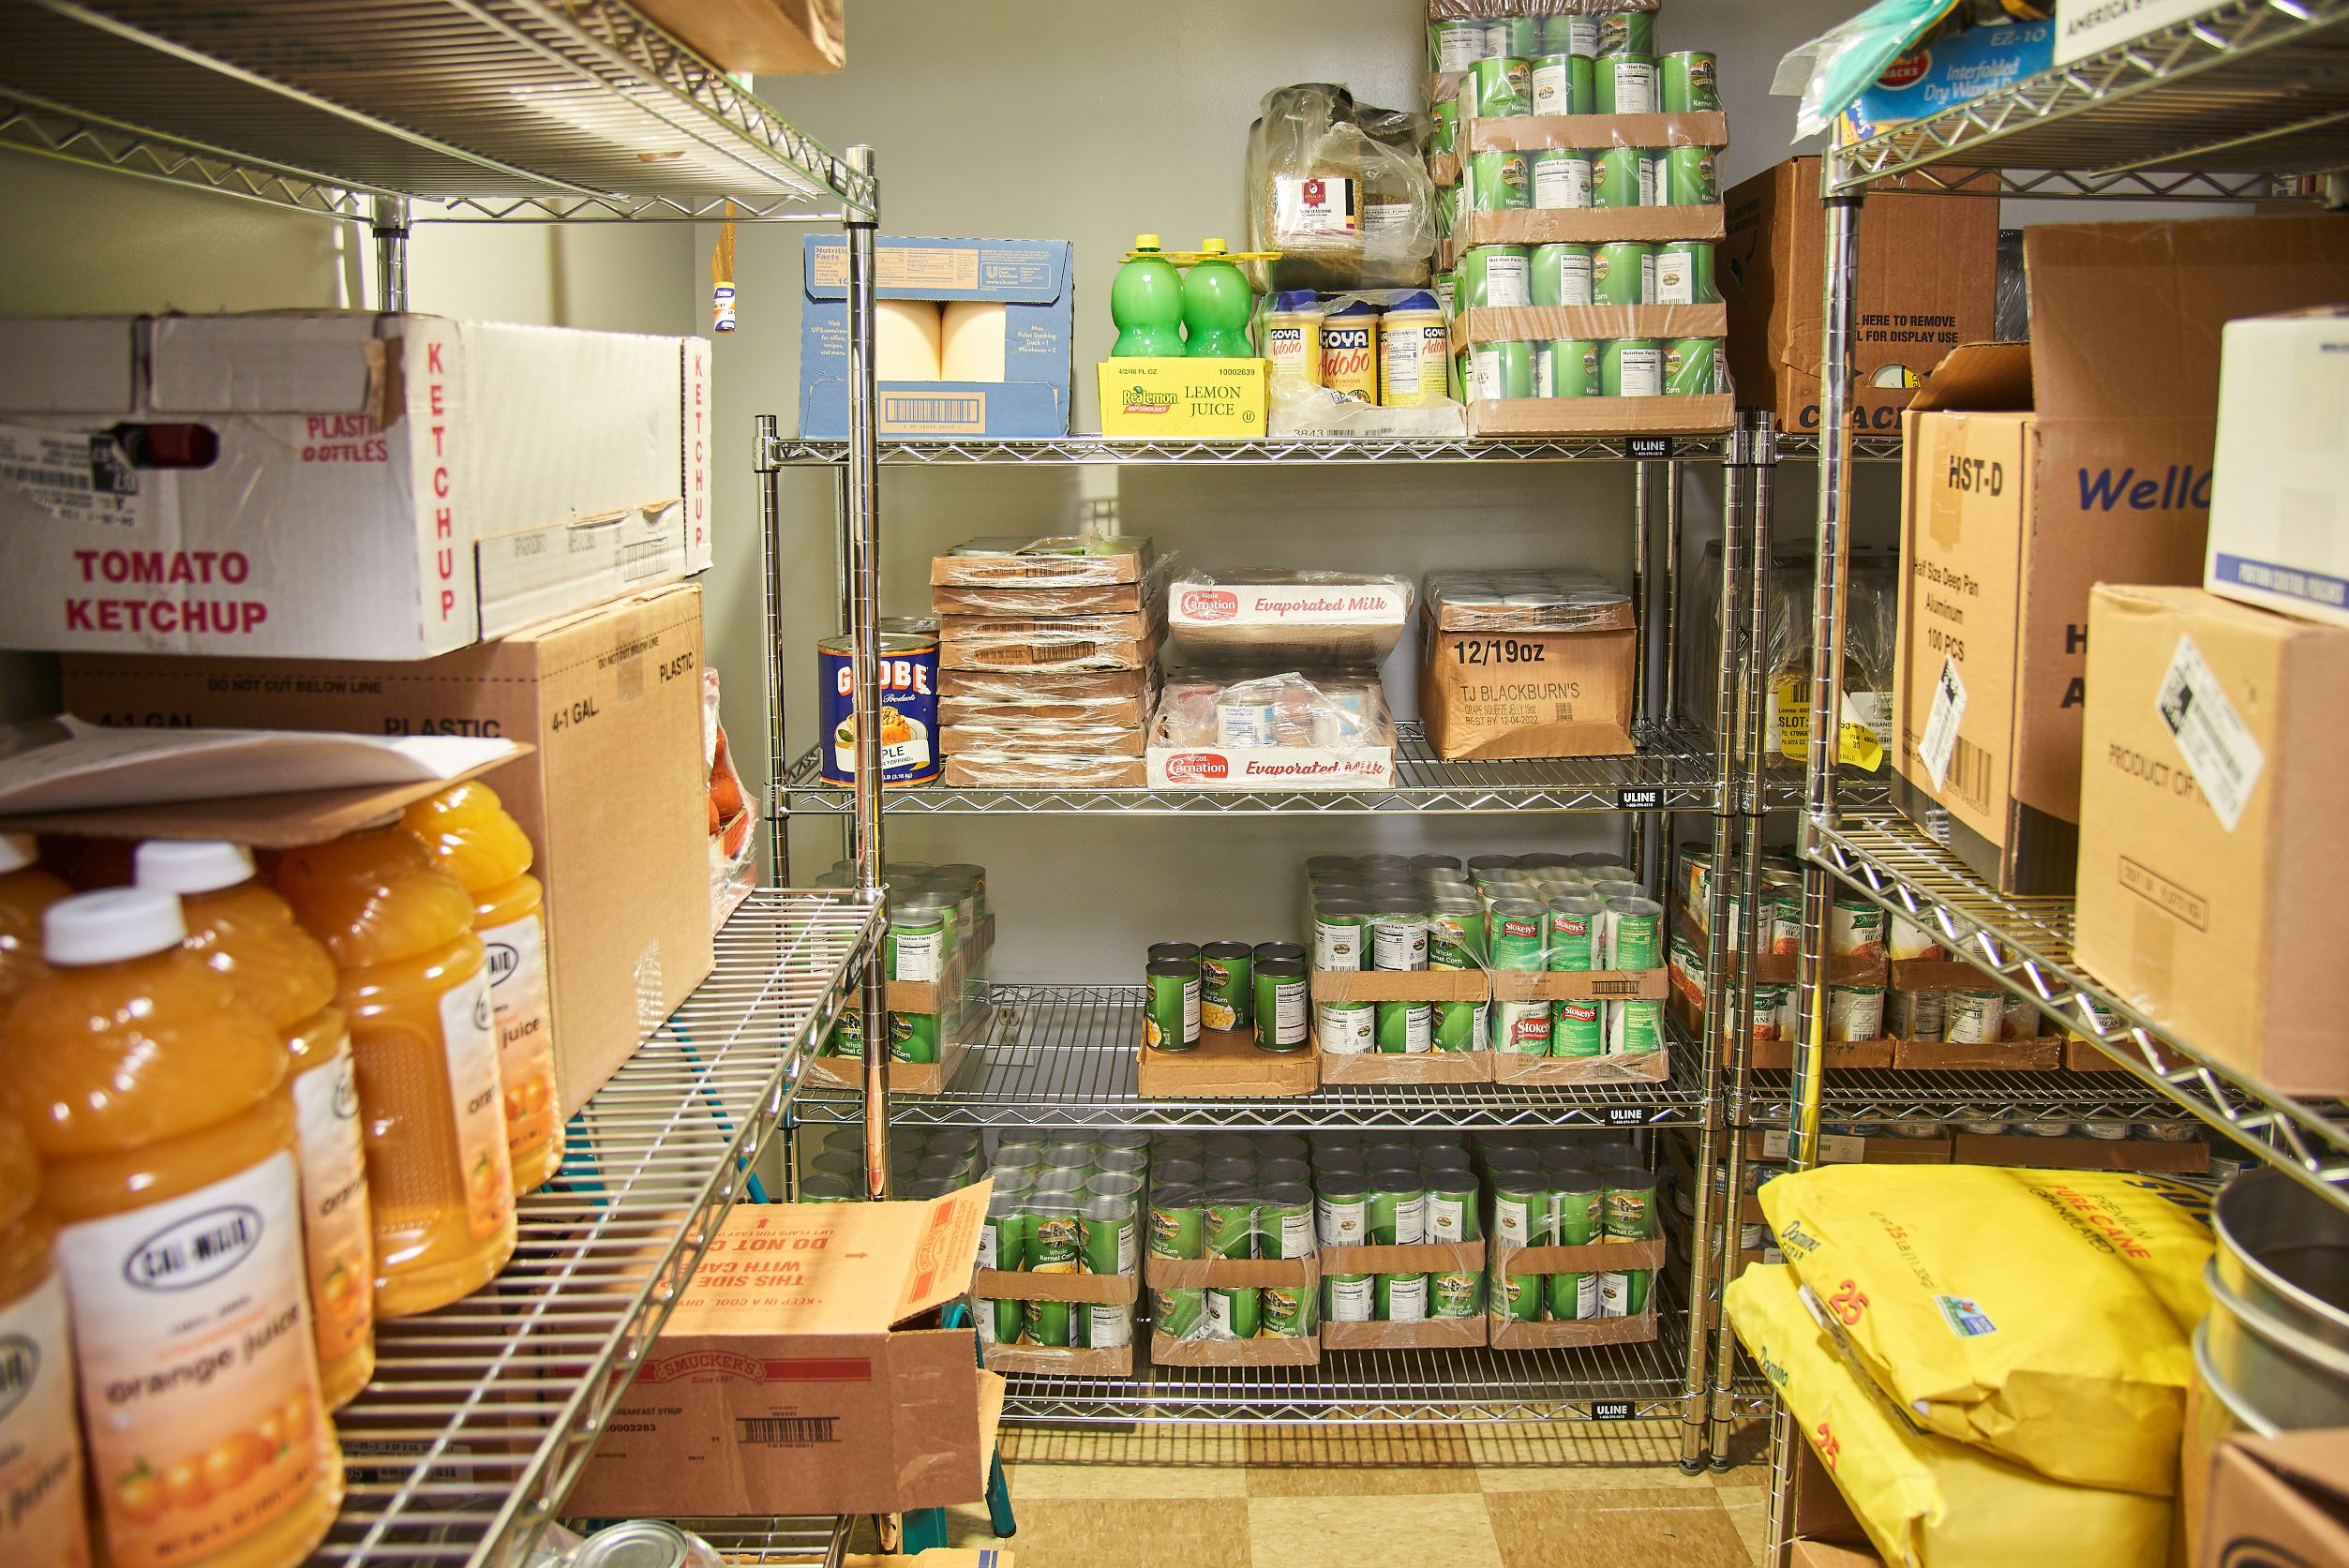 Isaiah House operates a food pantry, open four days a week, and has distributed 82,292 pounds of food to over 9,383 individuals in the last year. Photo courtesy of Isaiah House.